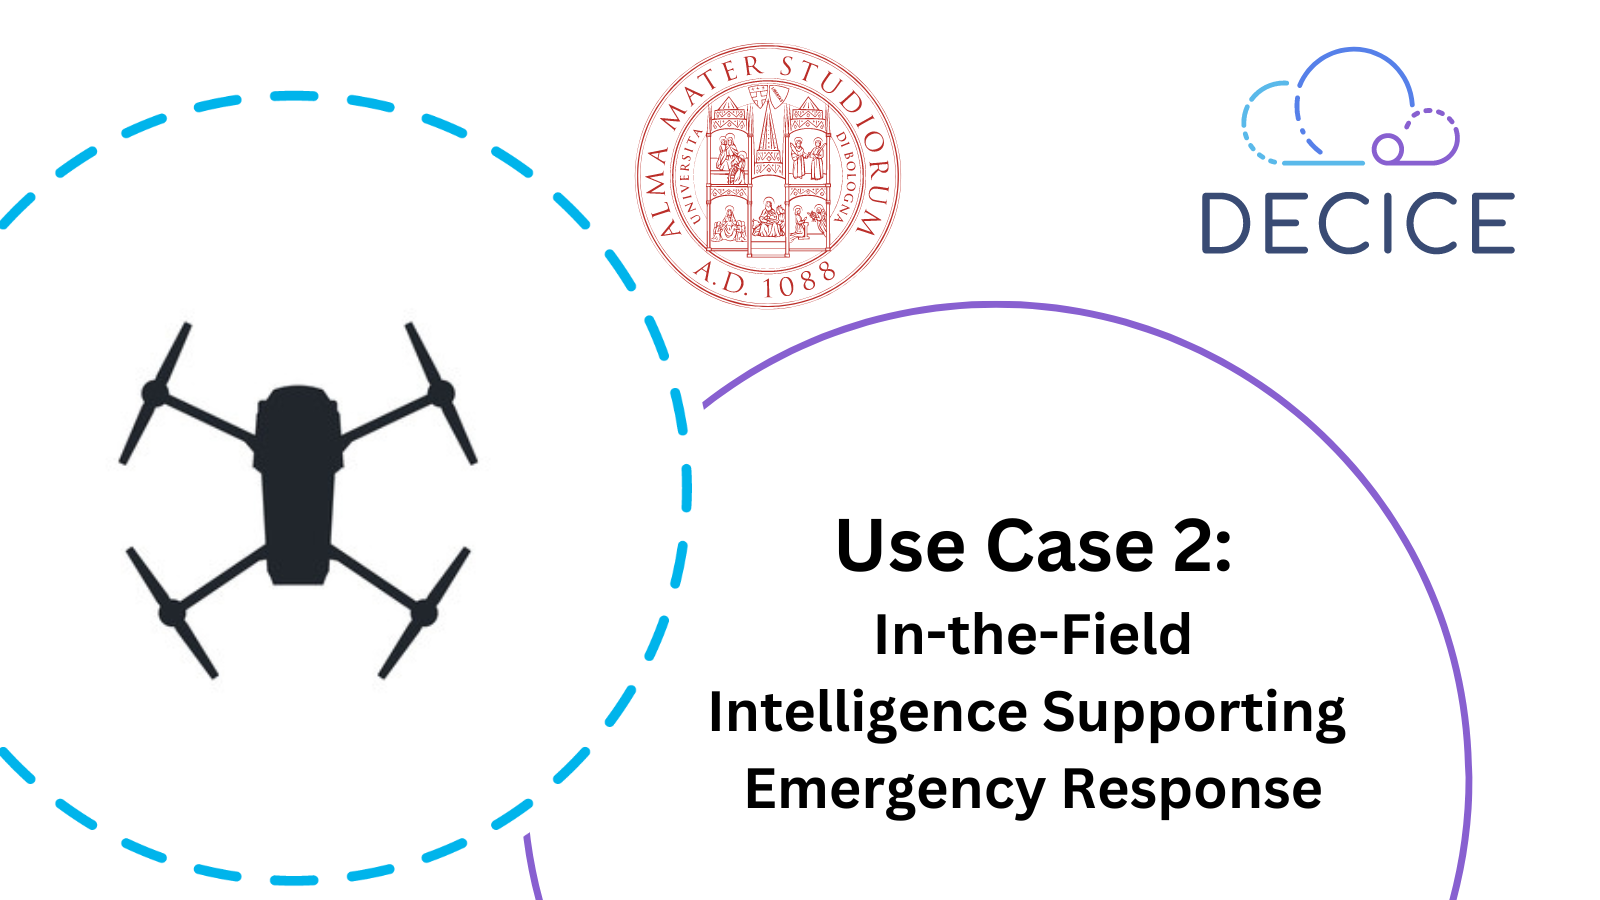 Use Case 2: In-the-Field Intelligence Supporting Emergency Response